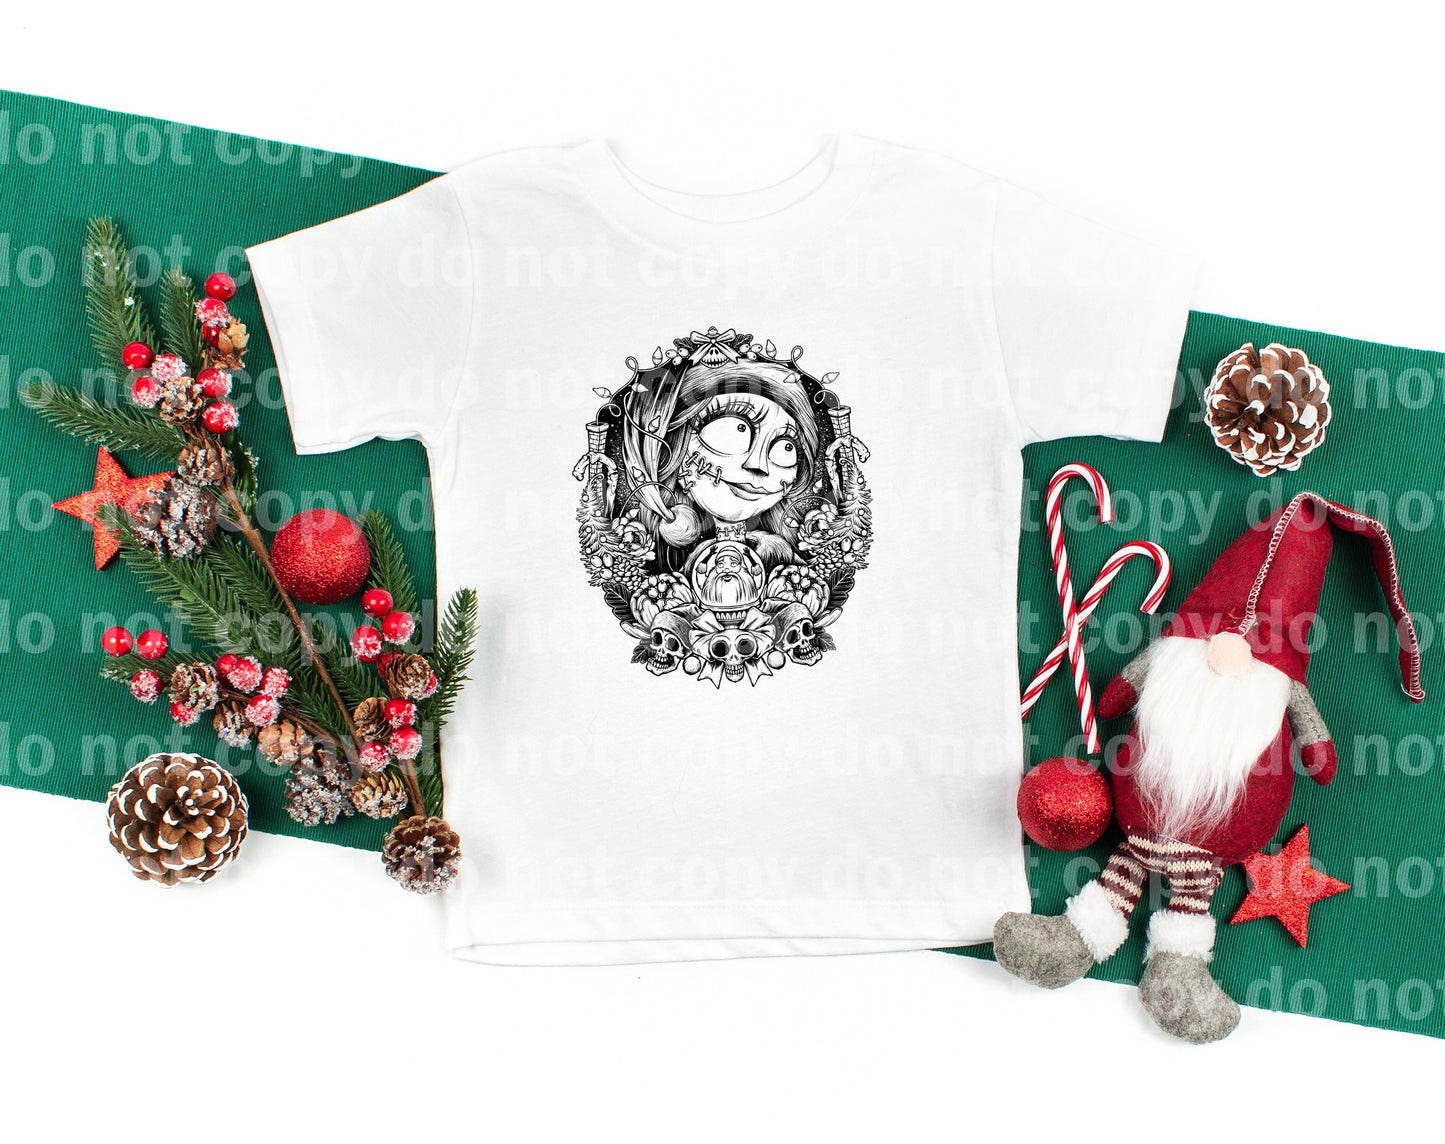 Sally Christmas Full Color/One Color Dream Print or Sublimation Print